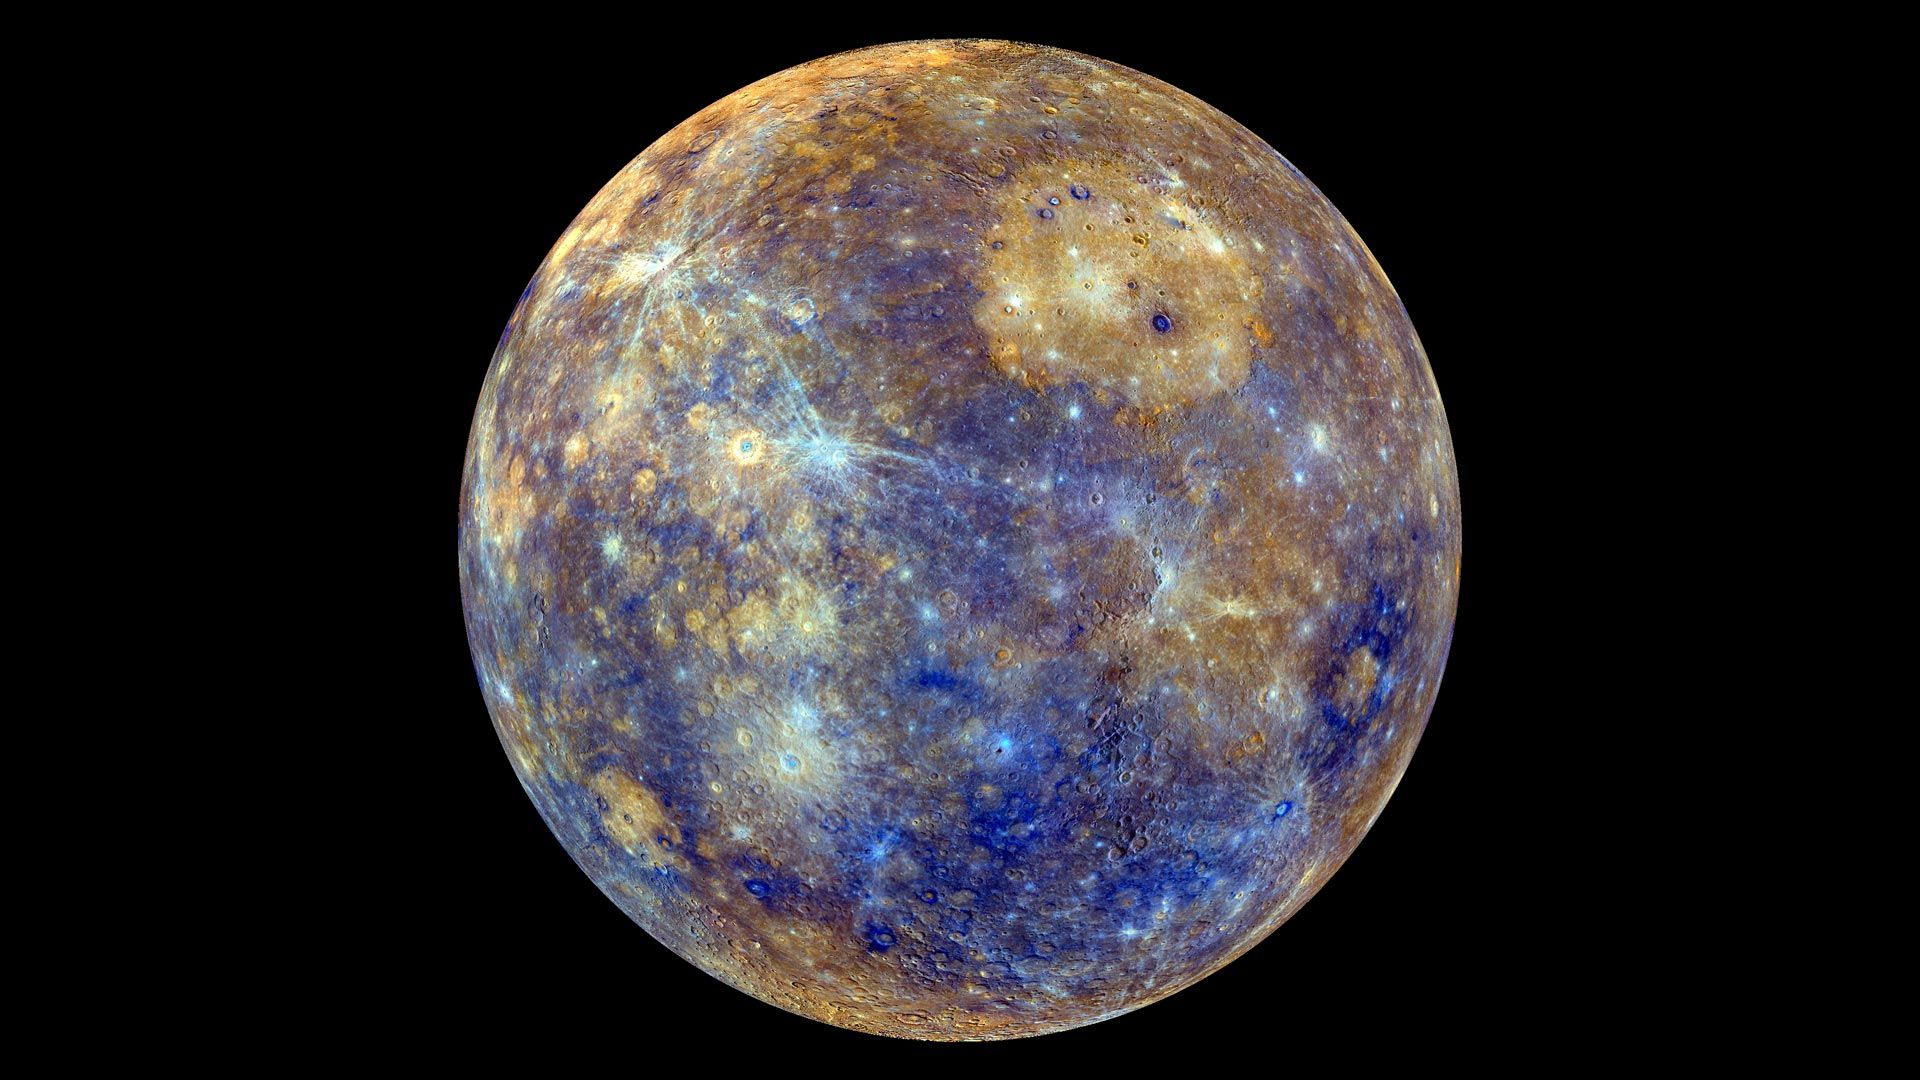 Top Five Mysteries About the Planet Mercury That BepiColombo Will